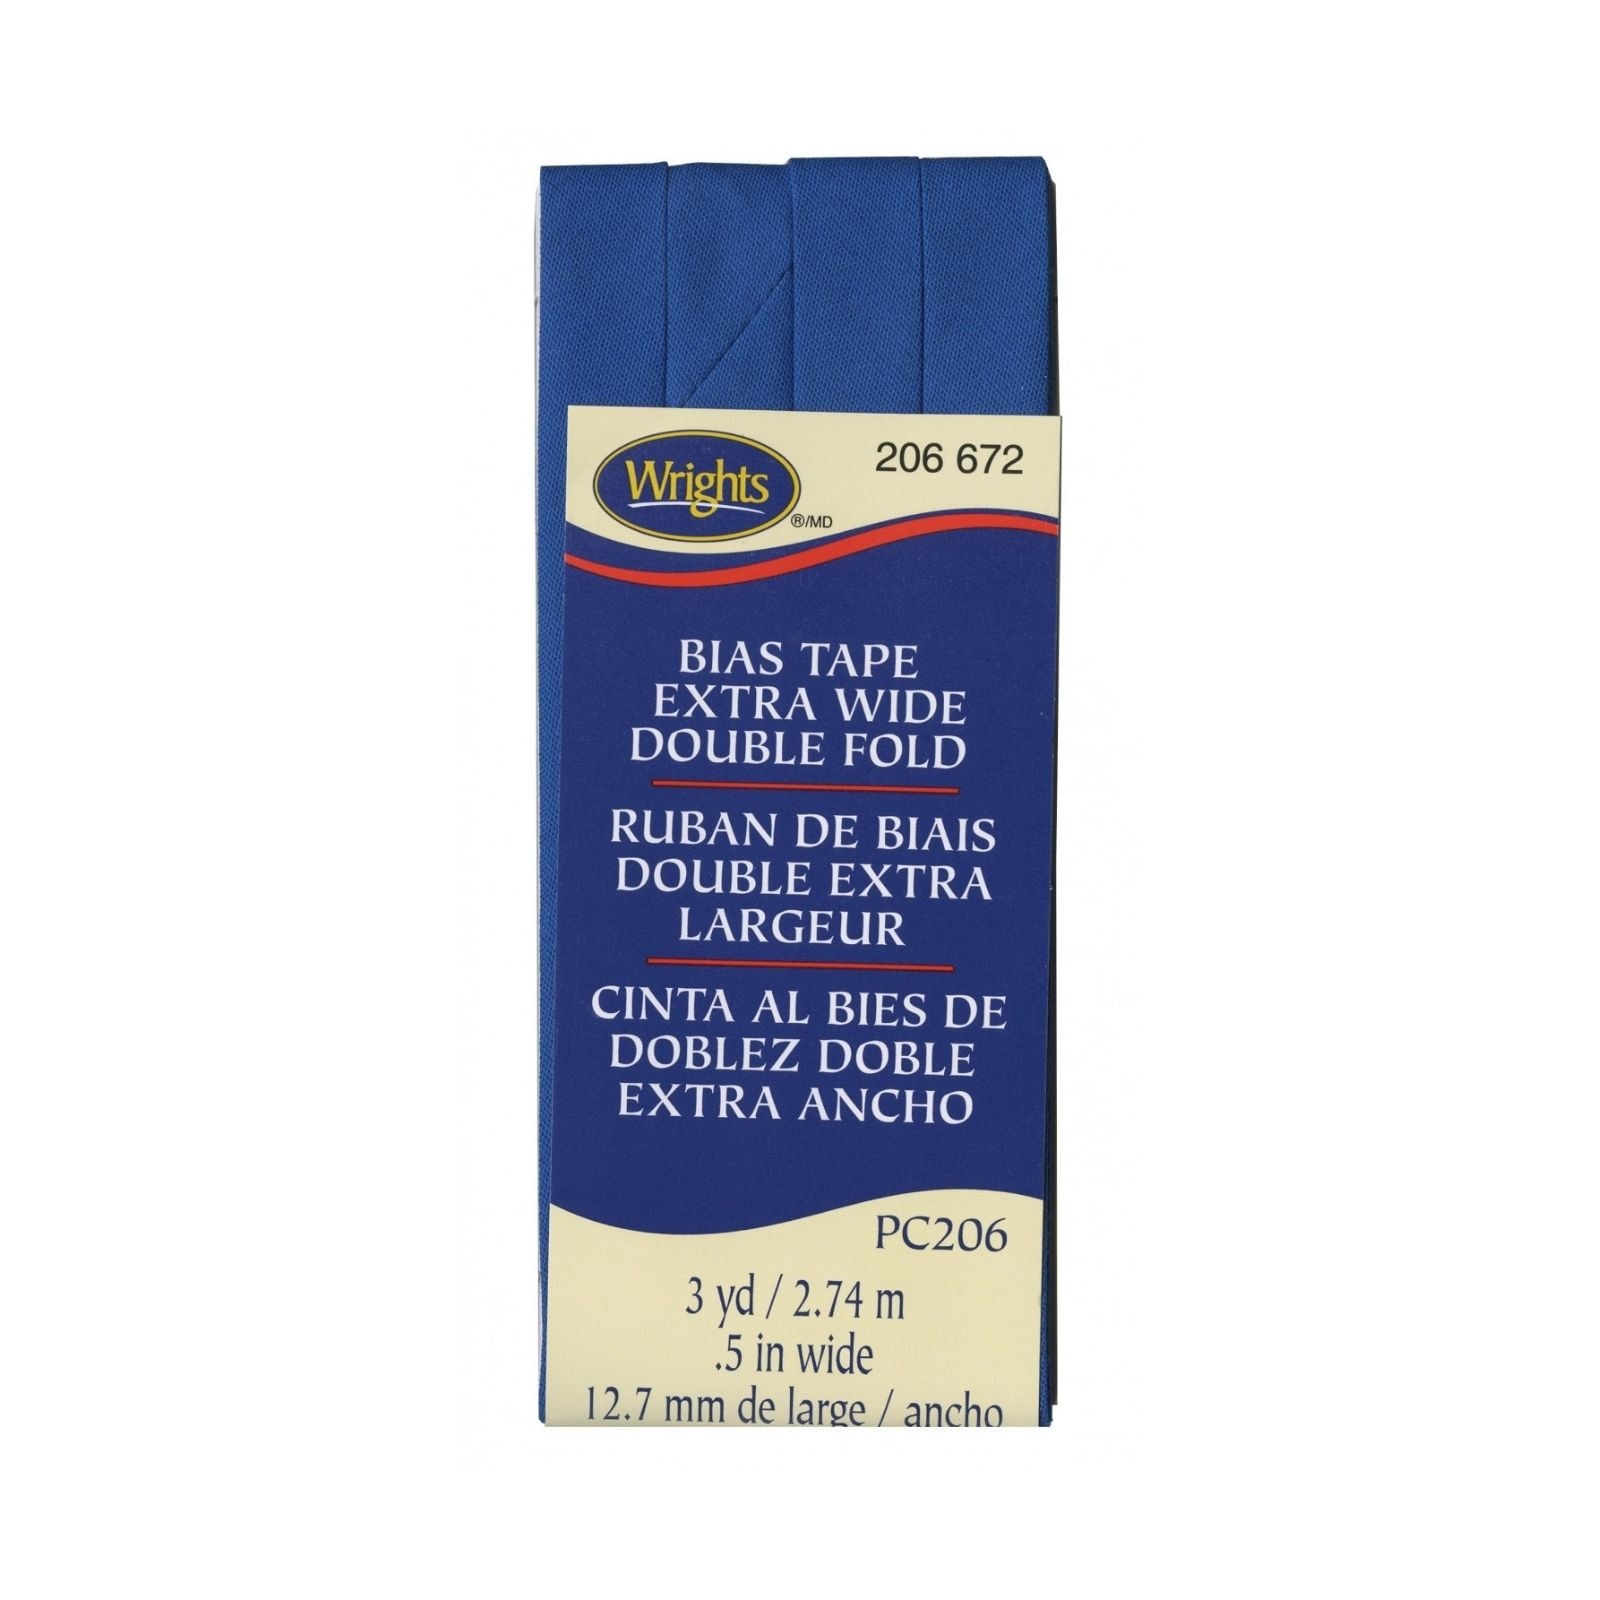 Wrights Extra Wide Double Fold Bias Tape - Yale